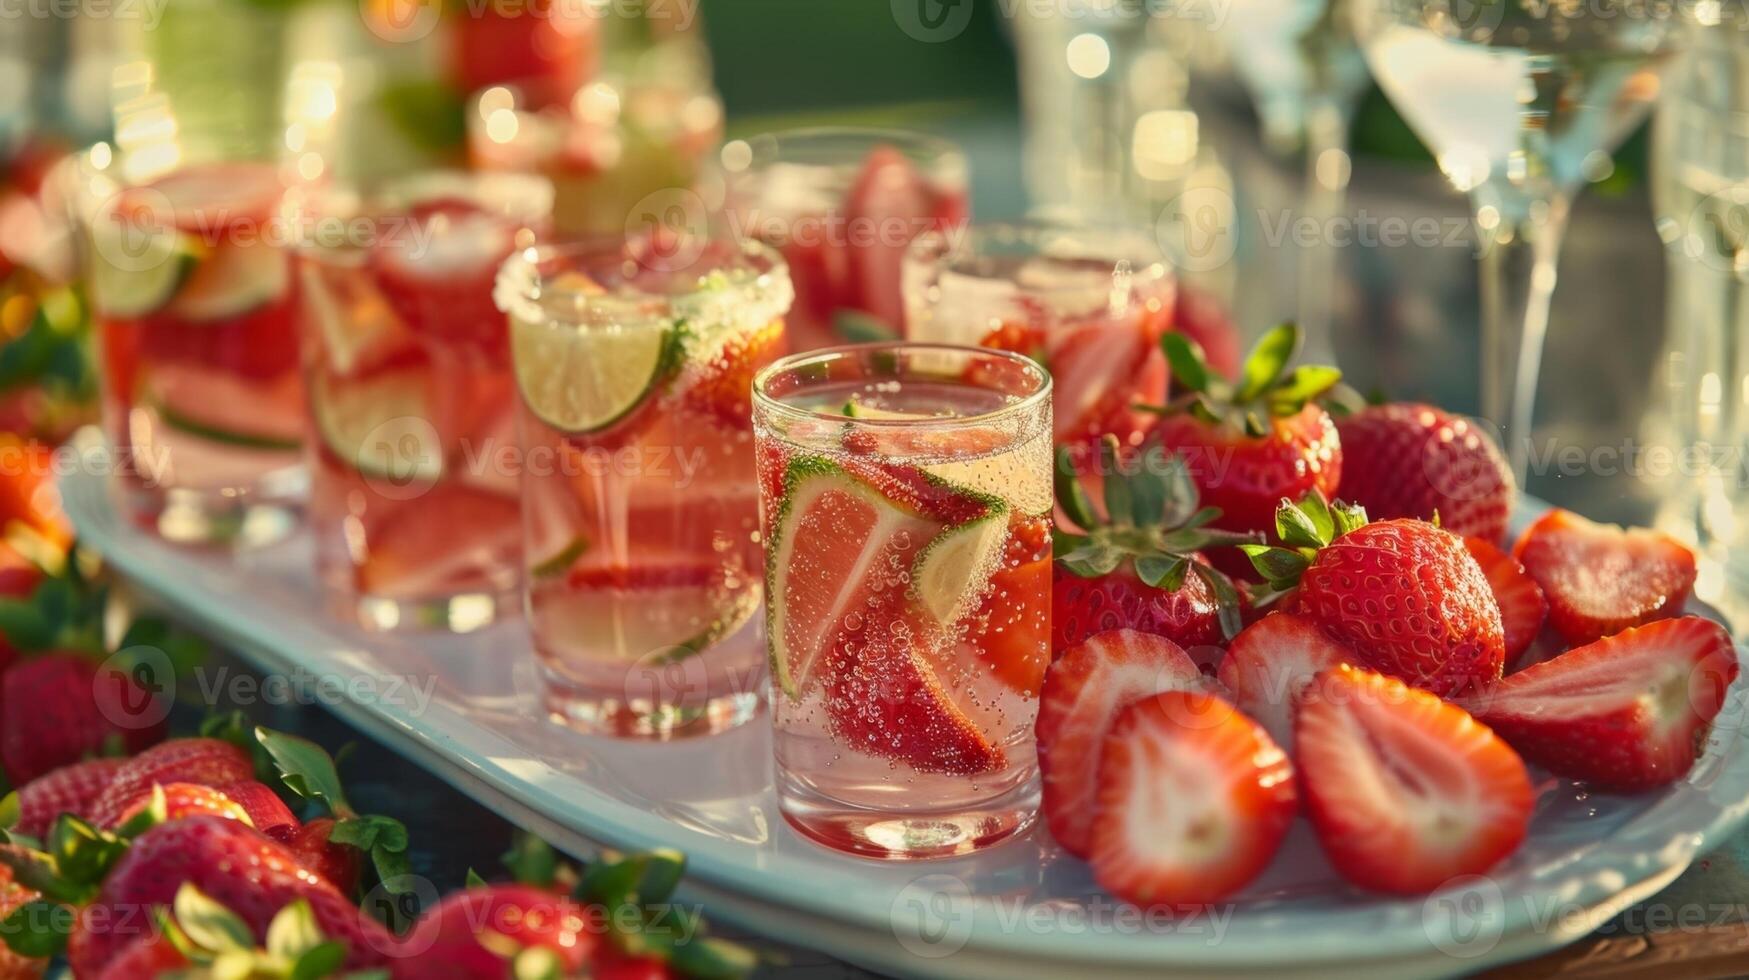 A variety of fruits such as sliced strawberries and juicy gs arranged on a platter next to small glasses of sparkling water ready to be muddled into delicious mocktails photo